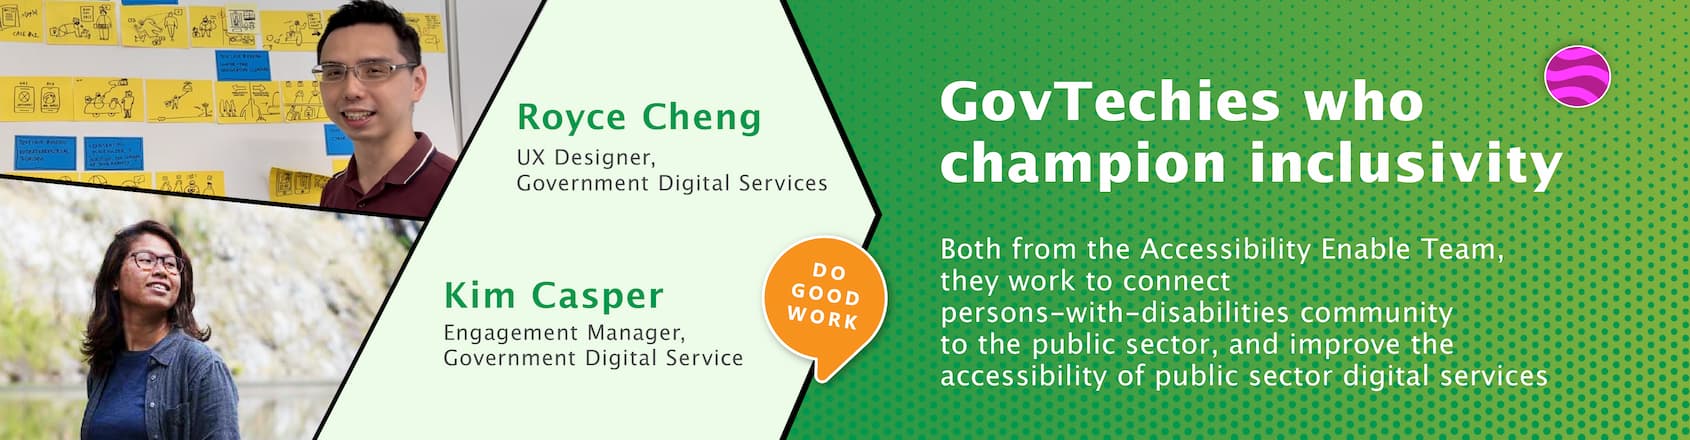 GovTechies who champion inclusivity. From the Accessibility Enable Team